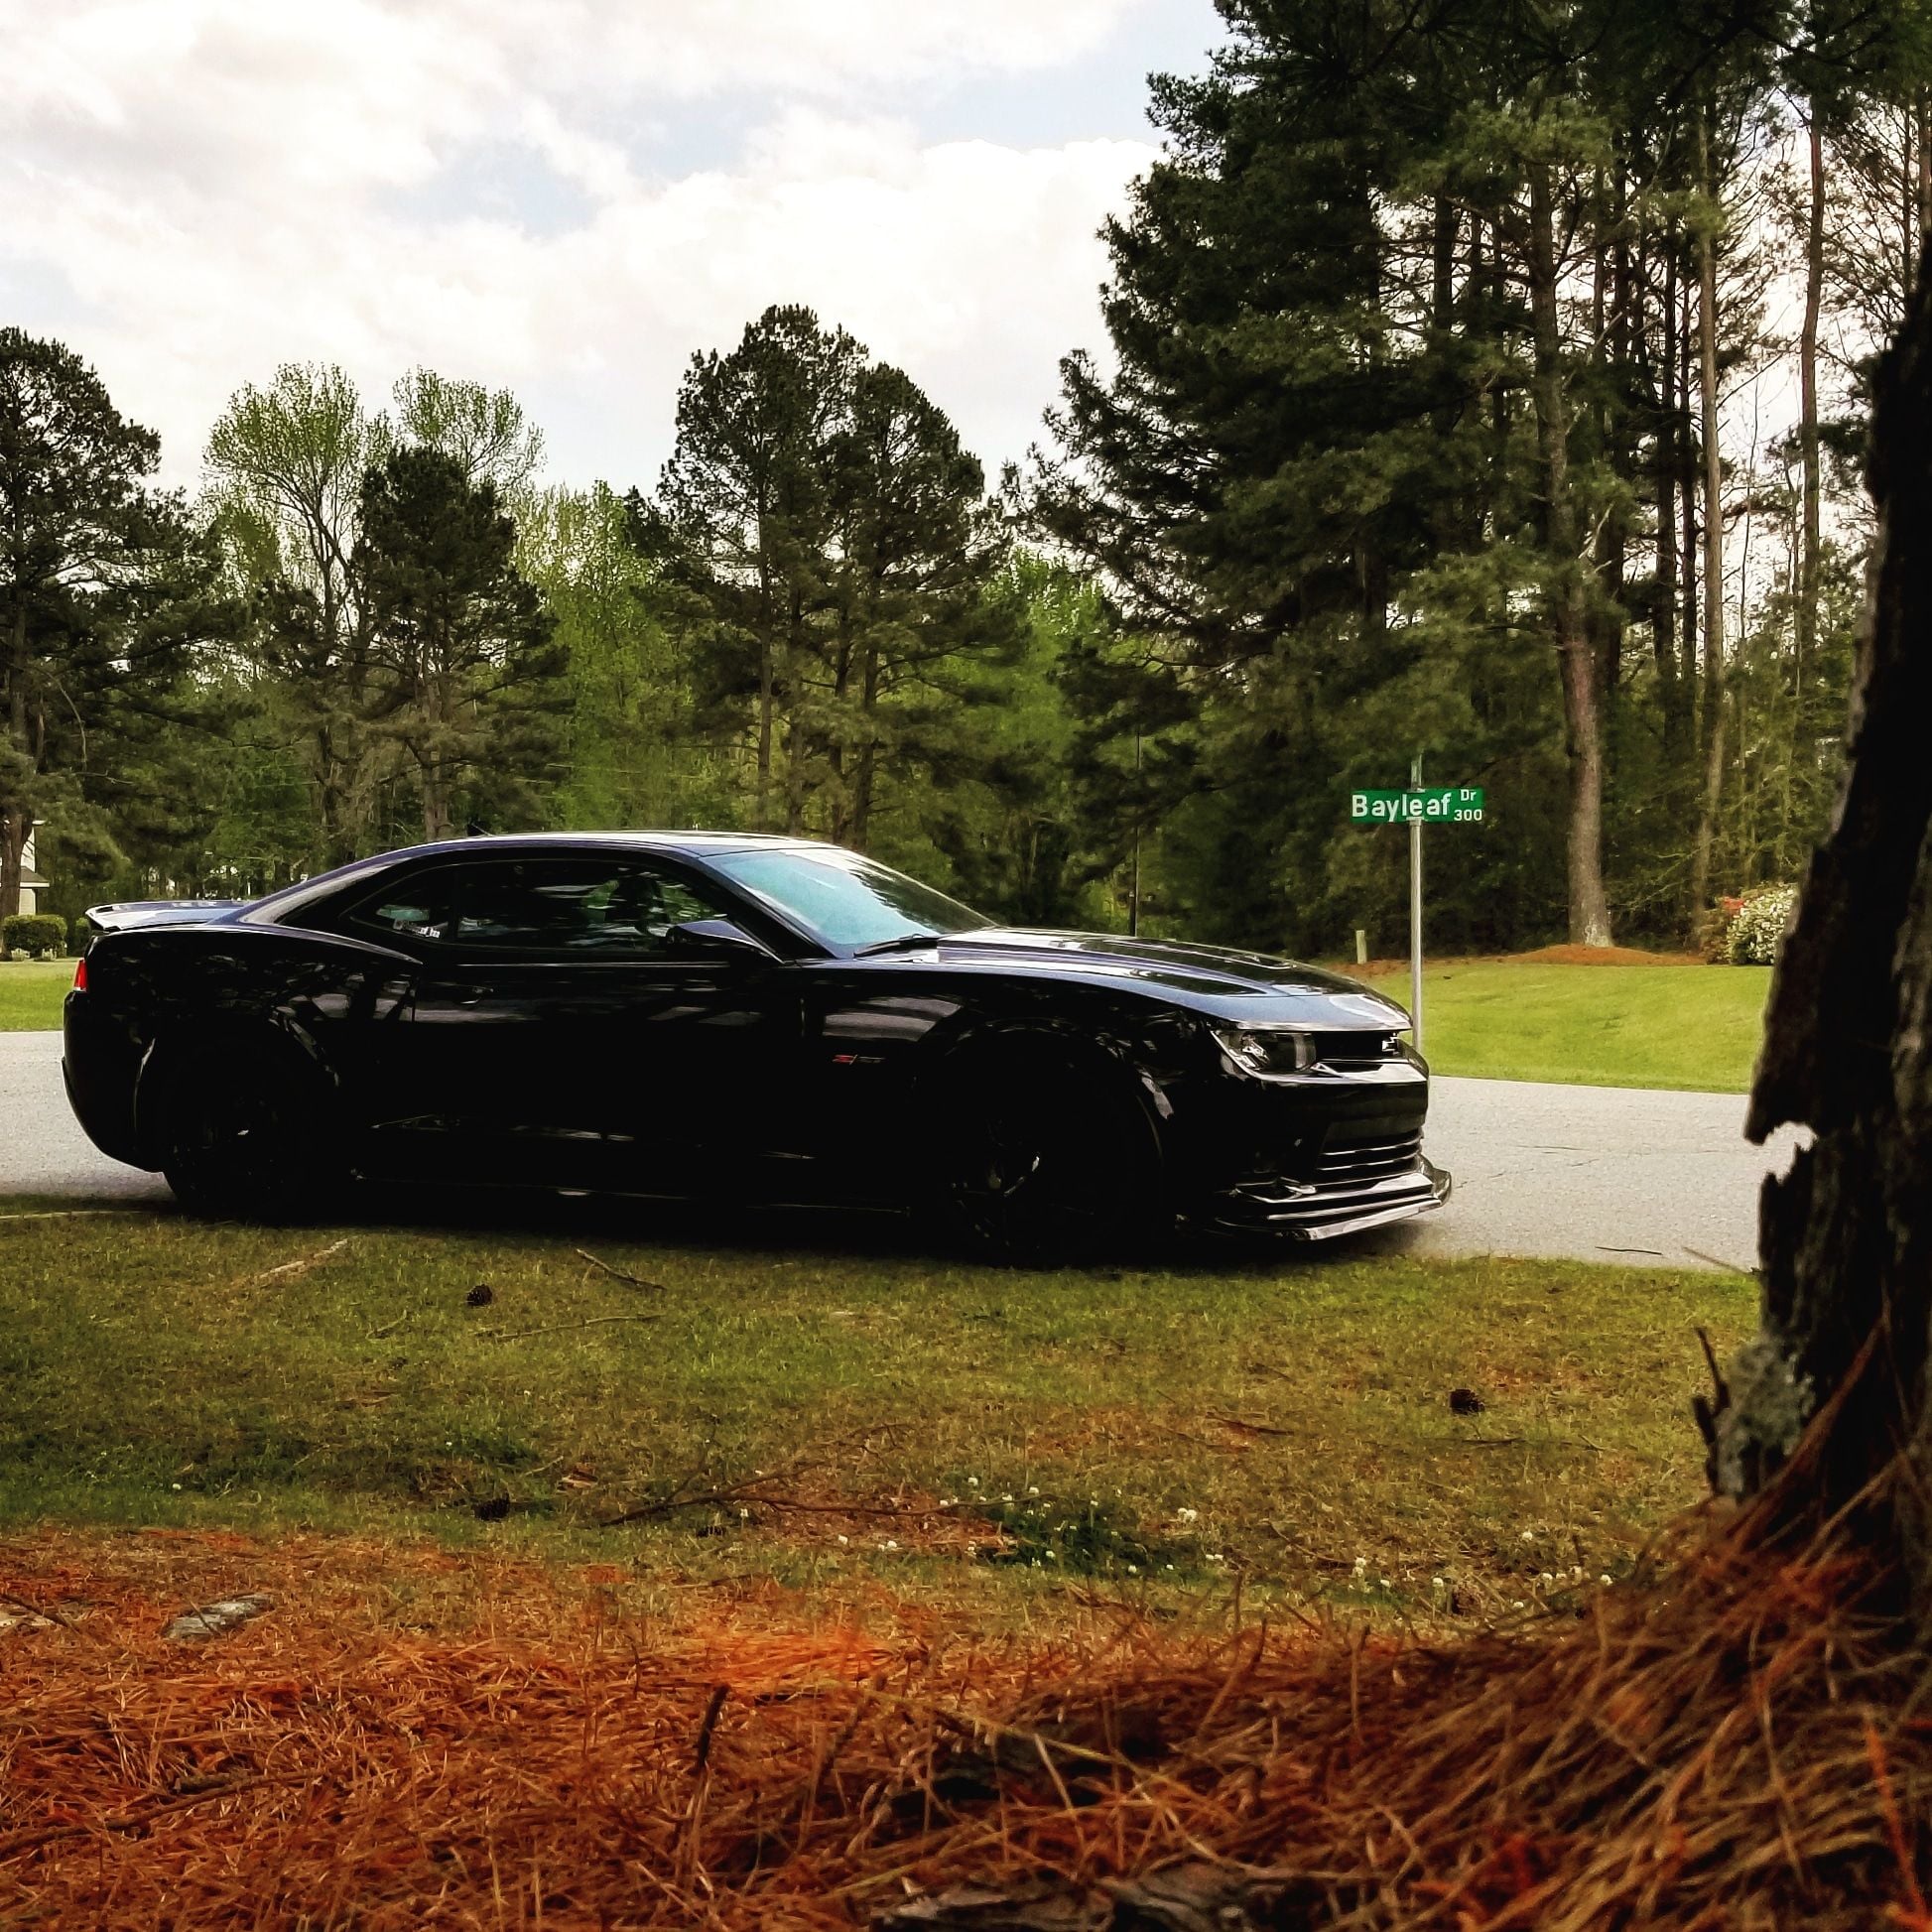 2015 Chevrolet Camaro - 2015 Z28 Camaro (cam, bolton's, 576whp) - Used - VIN 2G1FZ1EE0F9700814 - 18,670 Miles - 8 cyl - 2WD - Manual - Coupe - Black - Goldsboro, NC 27534, United States